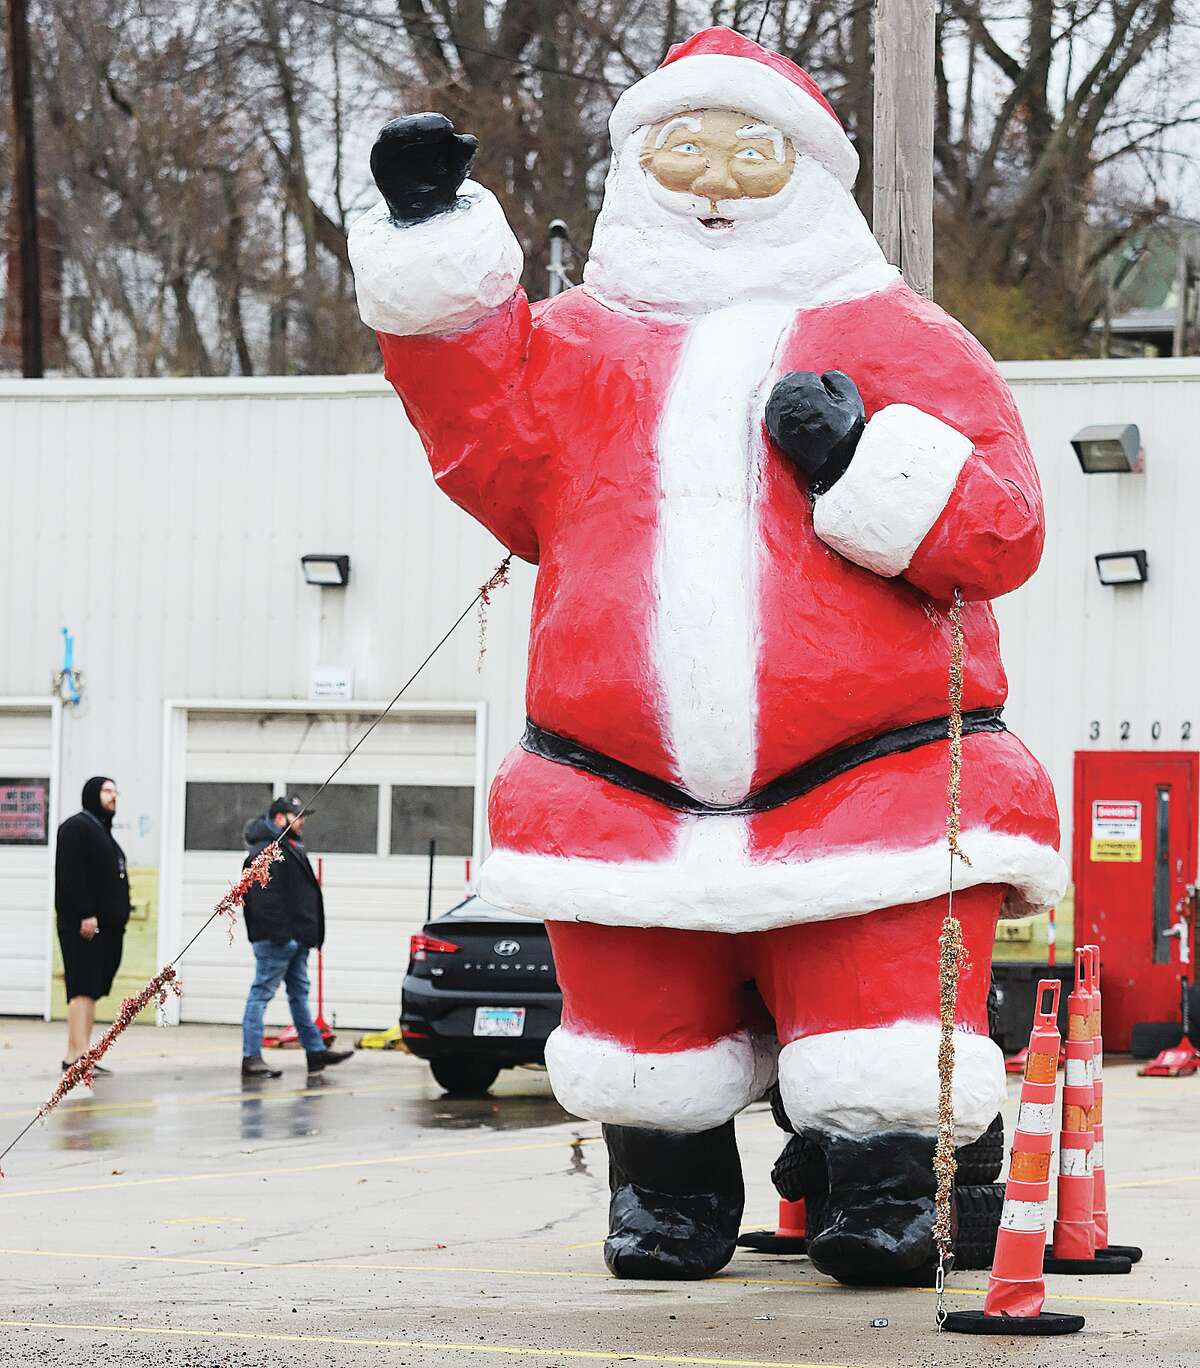 John Badman|The Telegraph The large fiberglass Santa returned to Cheapies Tires, 3202 E. Broadway in Alton, this week. Santa is there to greet passing motorists, and this year Santa isn't wearing the surgical mask he sported at the height of the COVID-19 pandemic.